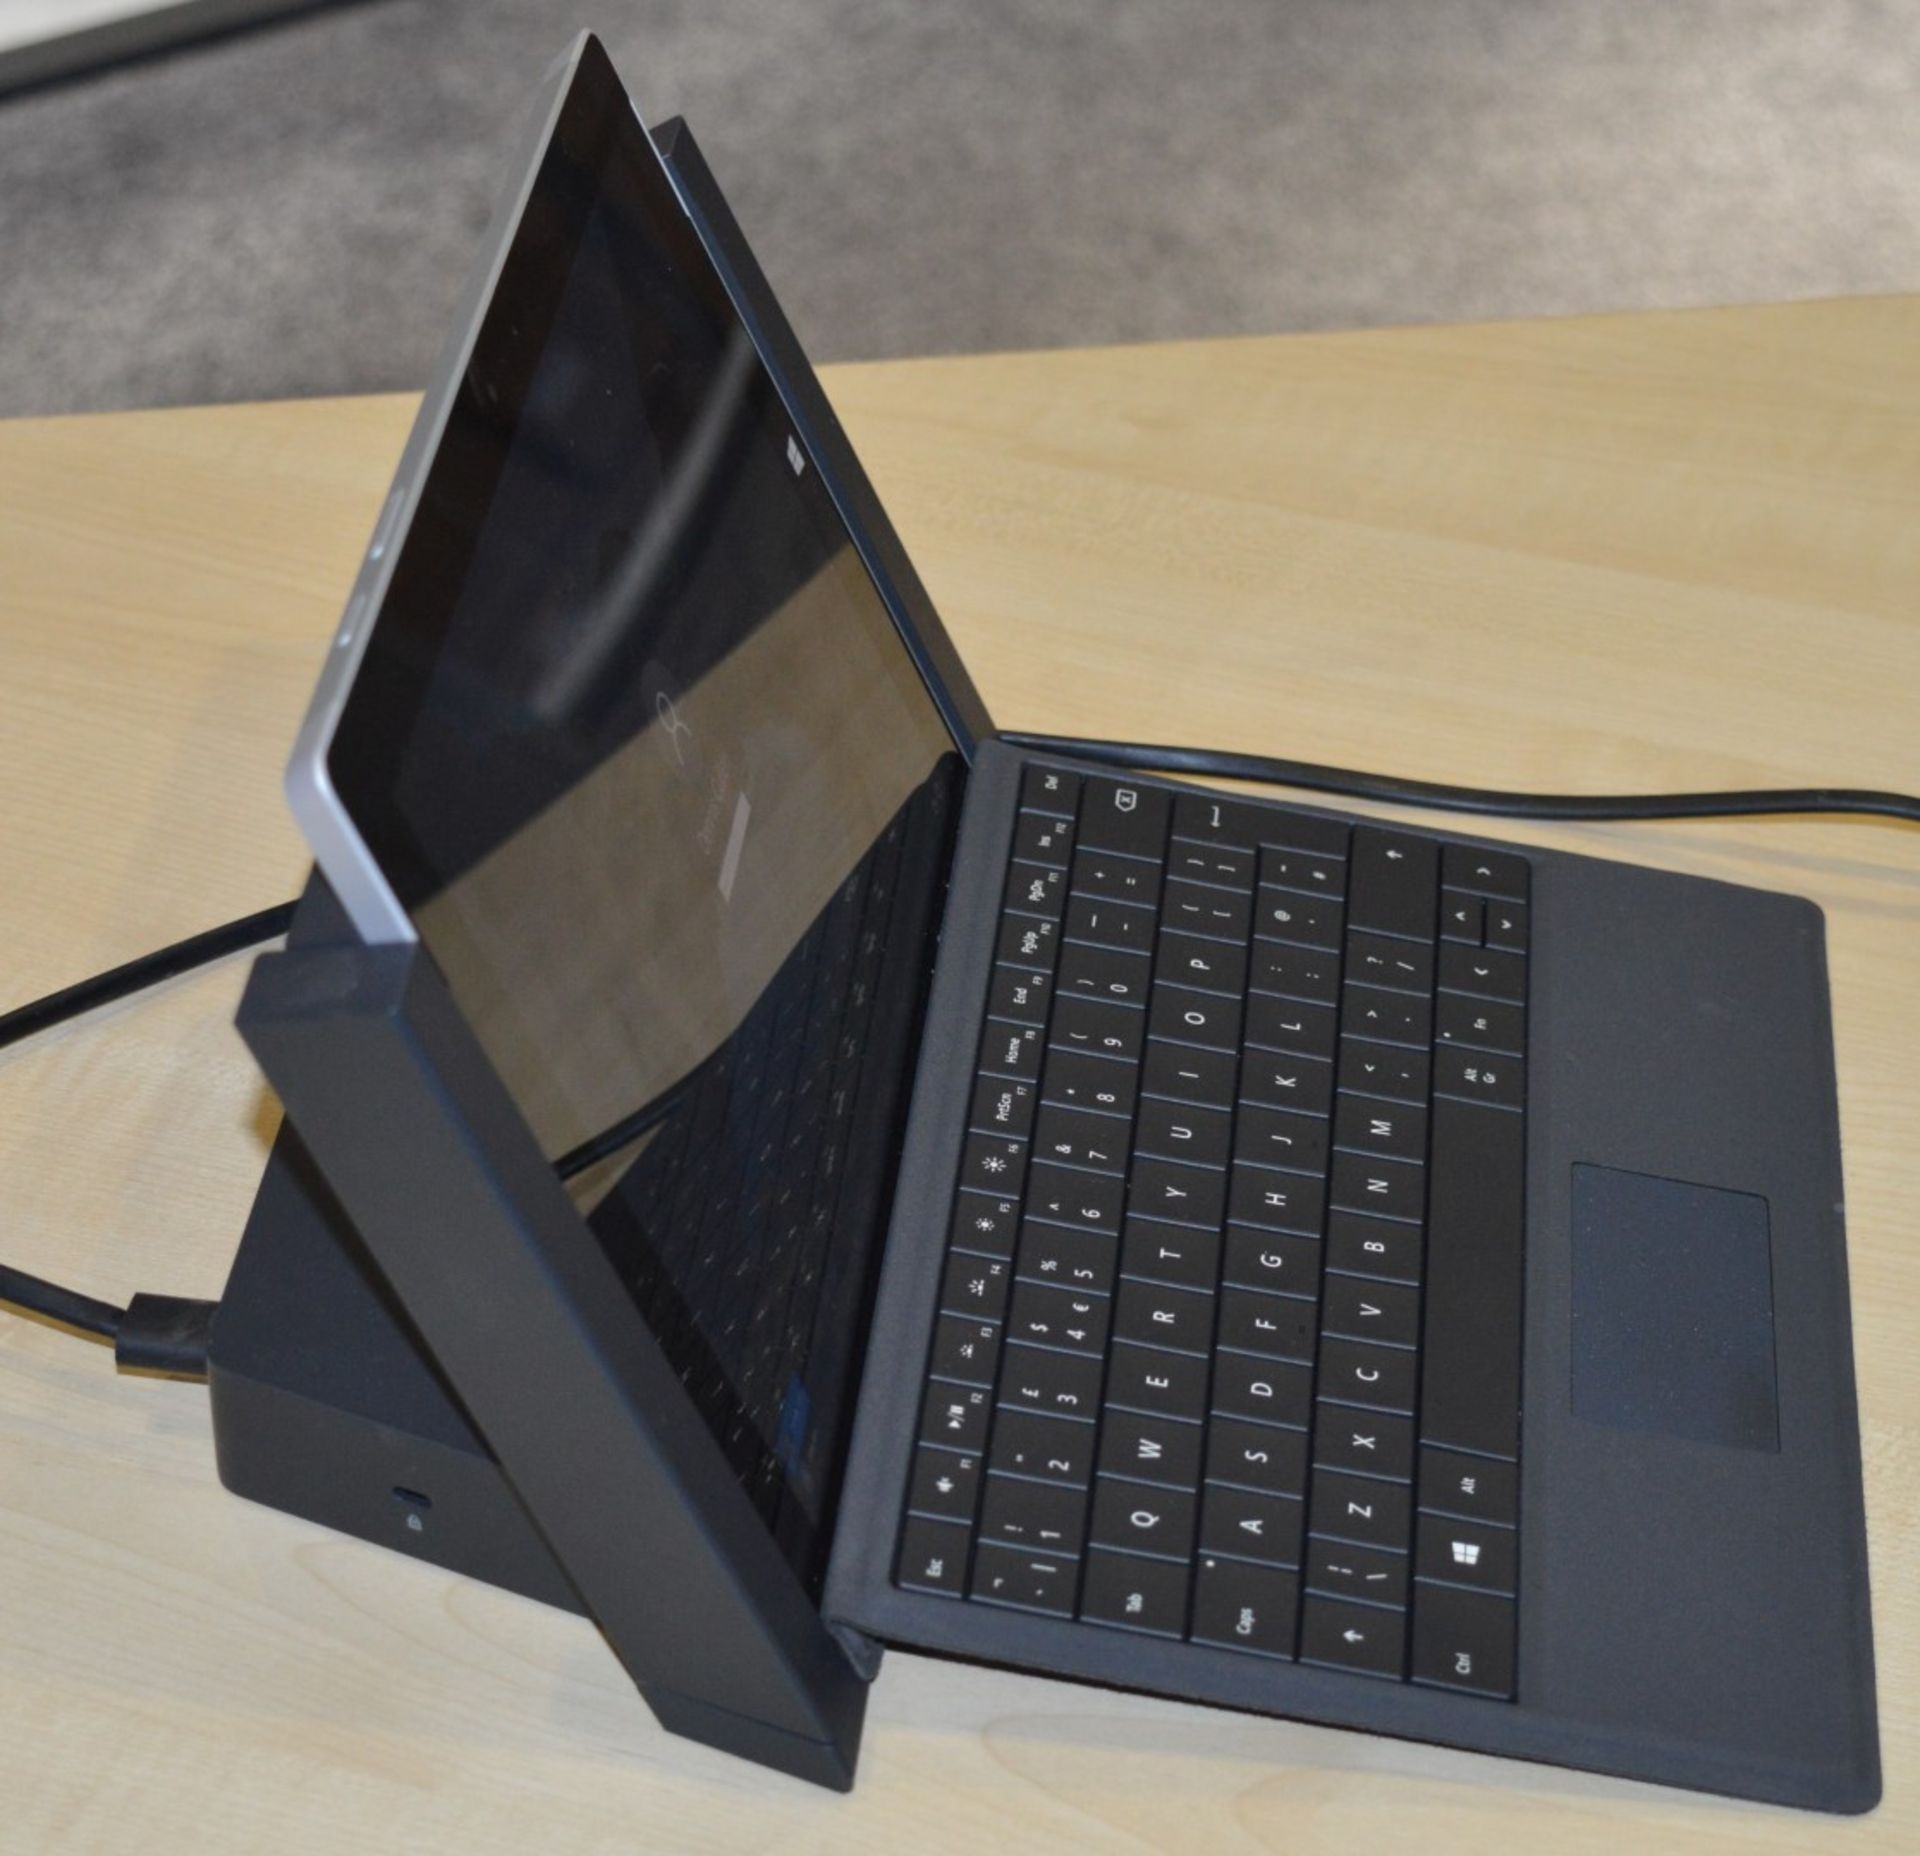 1 x Microsoft Surface 3 Wifi + LTE in Silver With Keyboard Cover and Charging Dock - Intel Atom x7- - Image 4 of 9